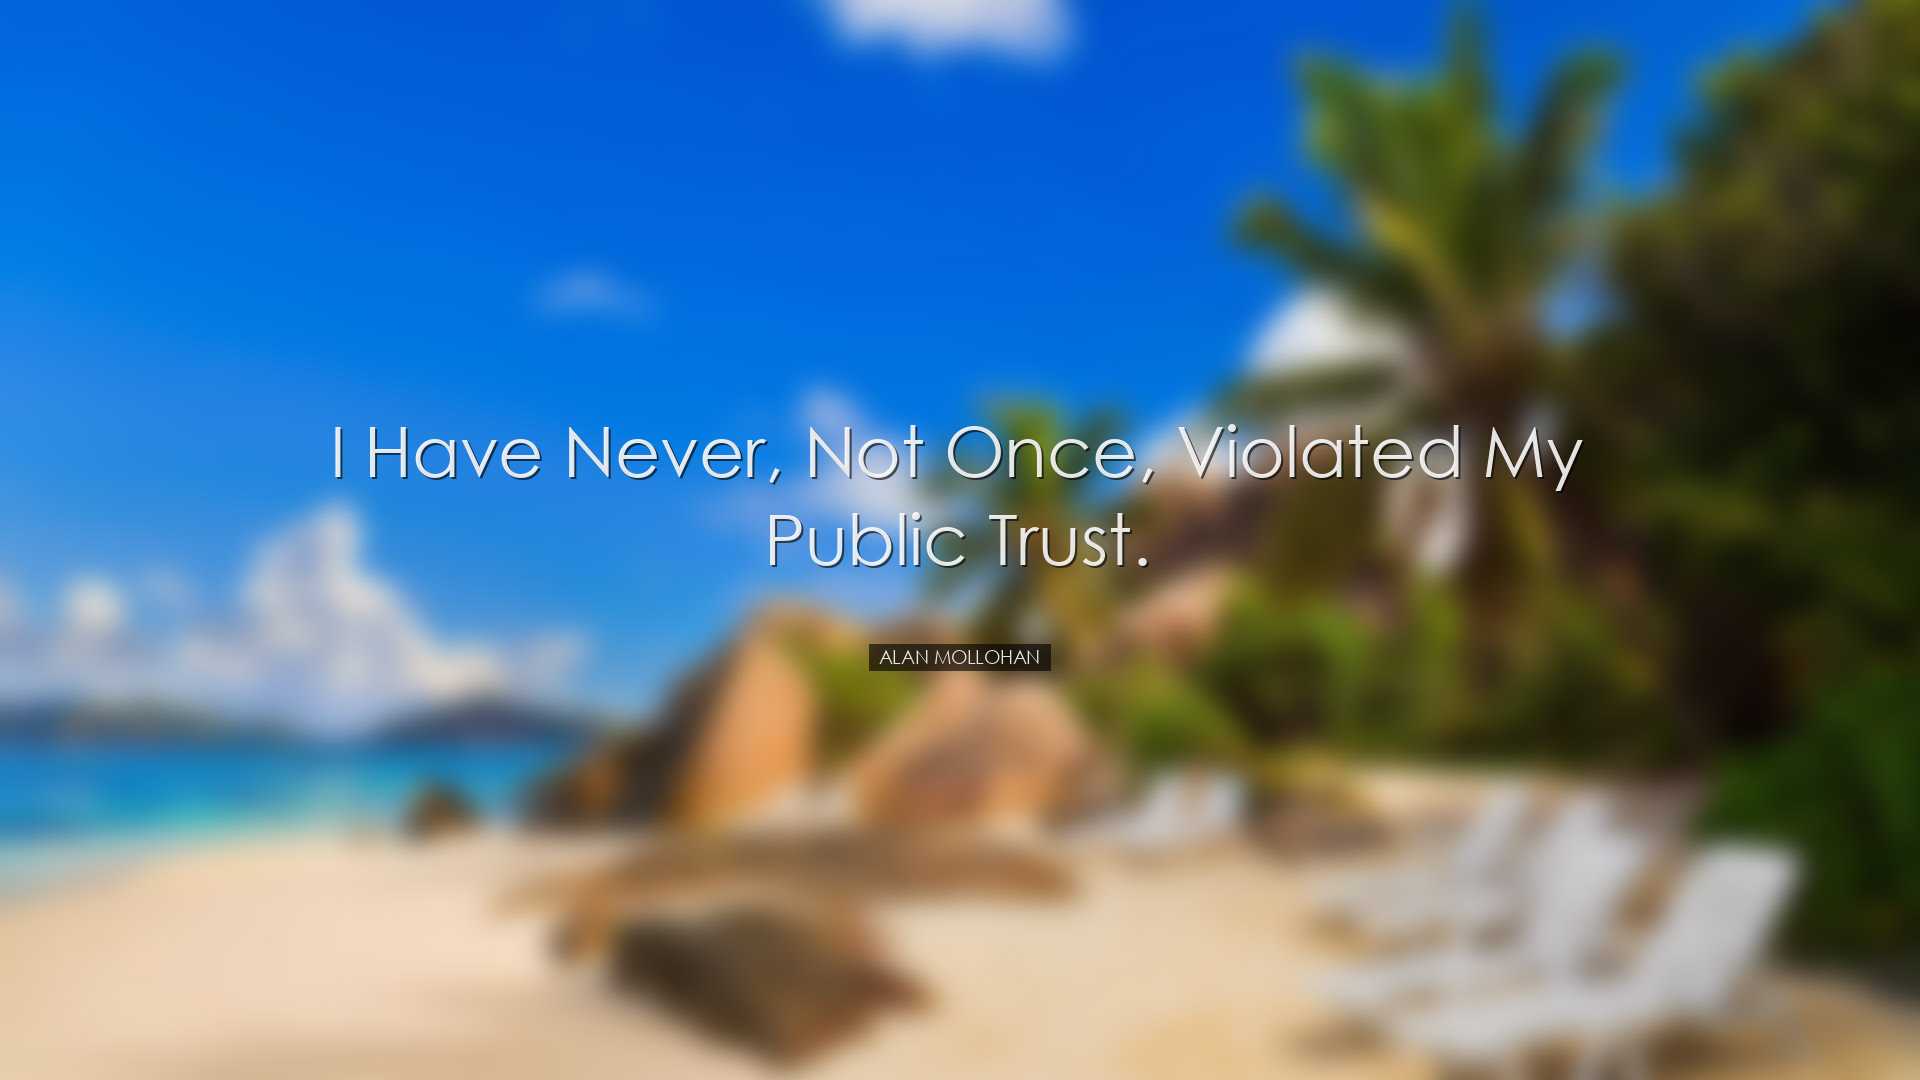 I have never, not once, violated my public trust. - Alan Mollohan